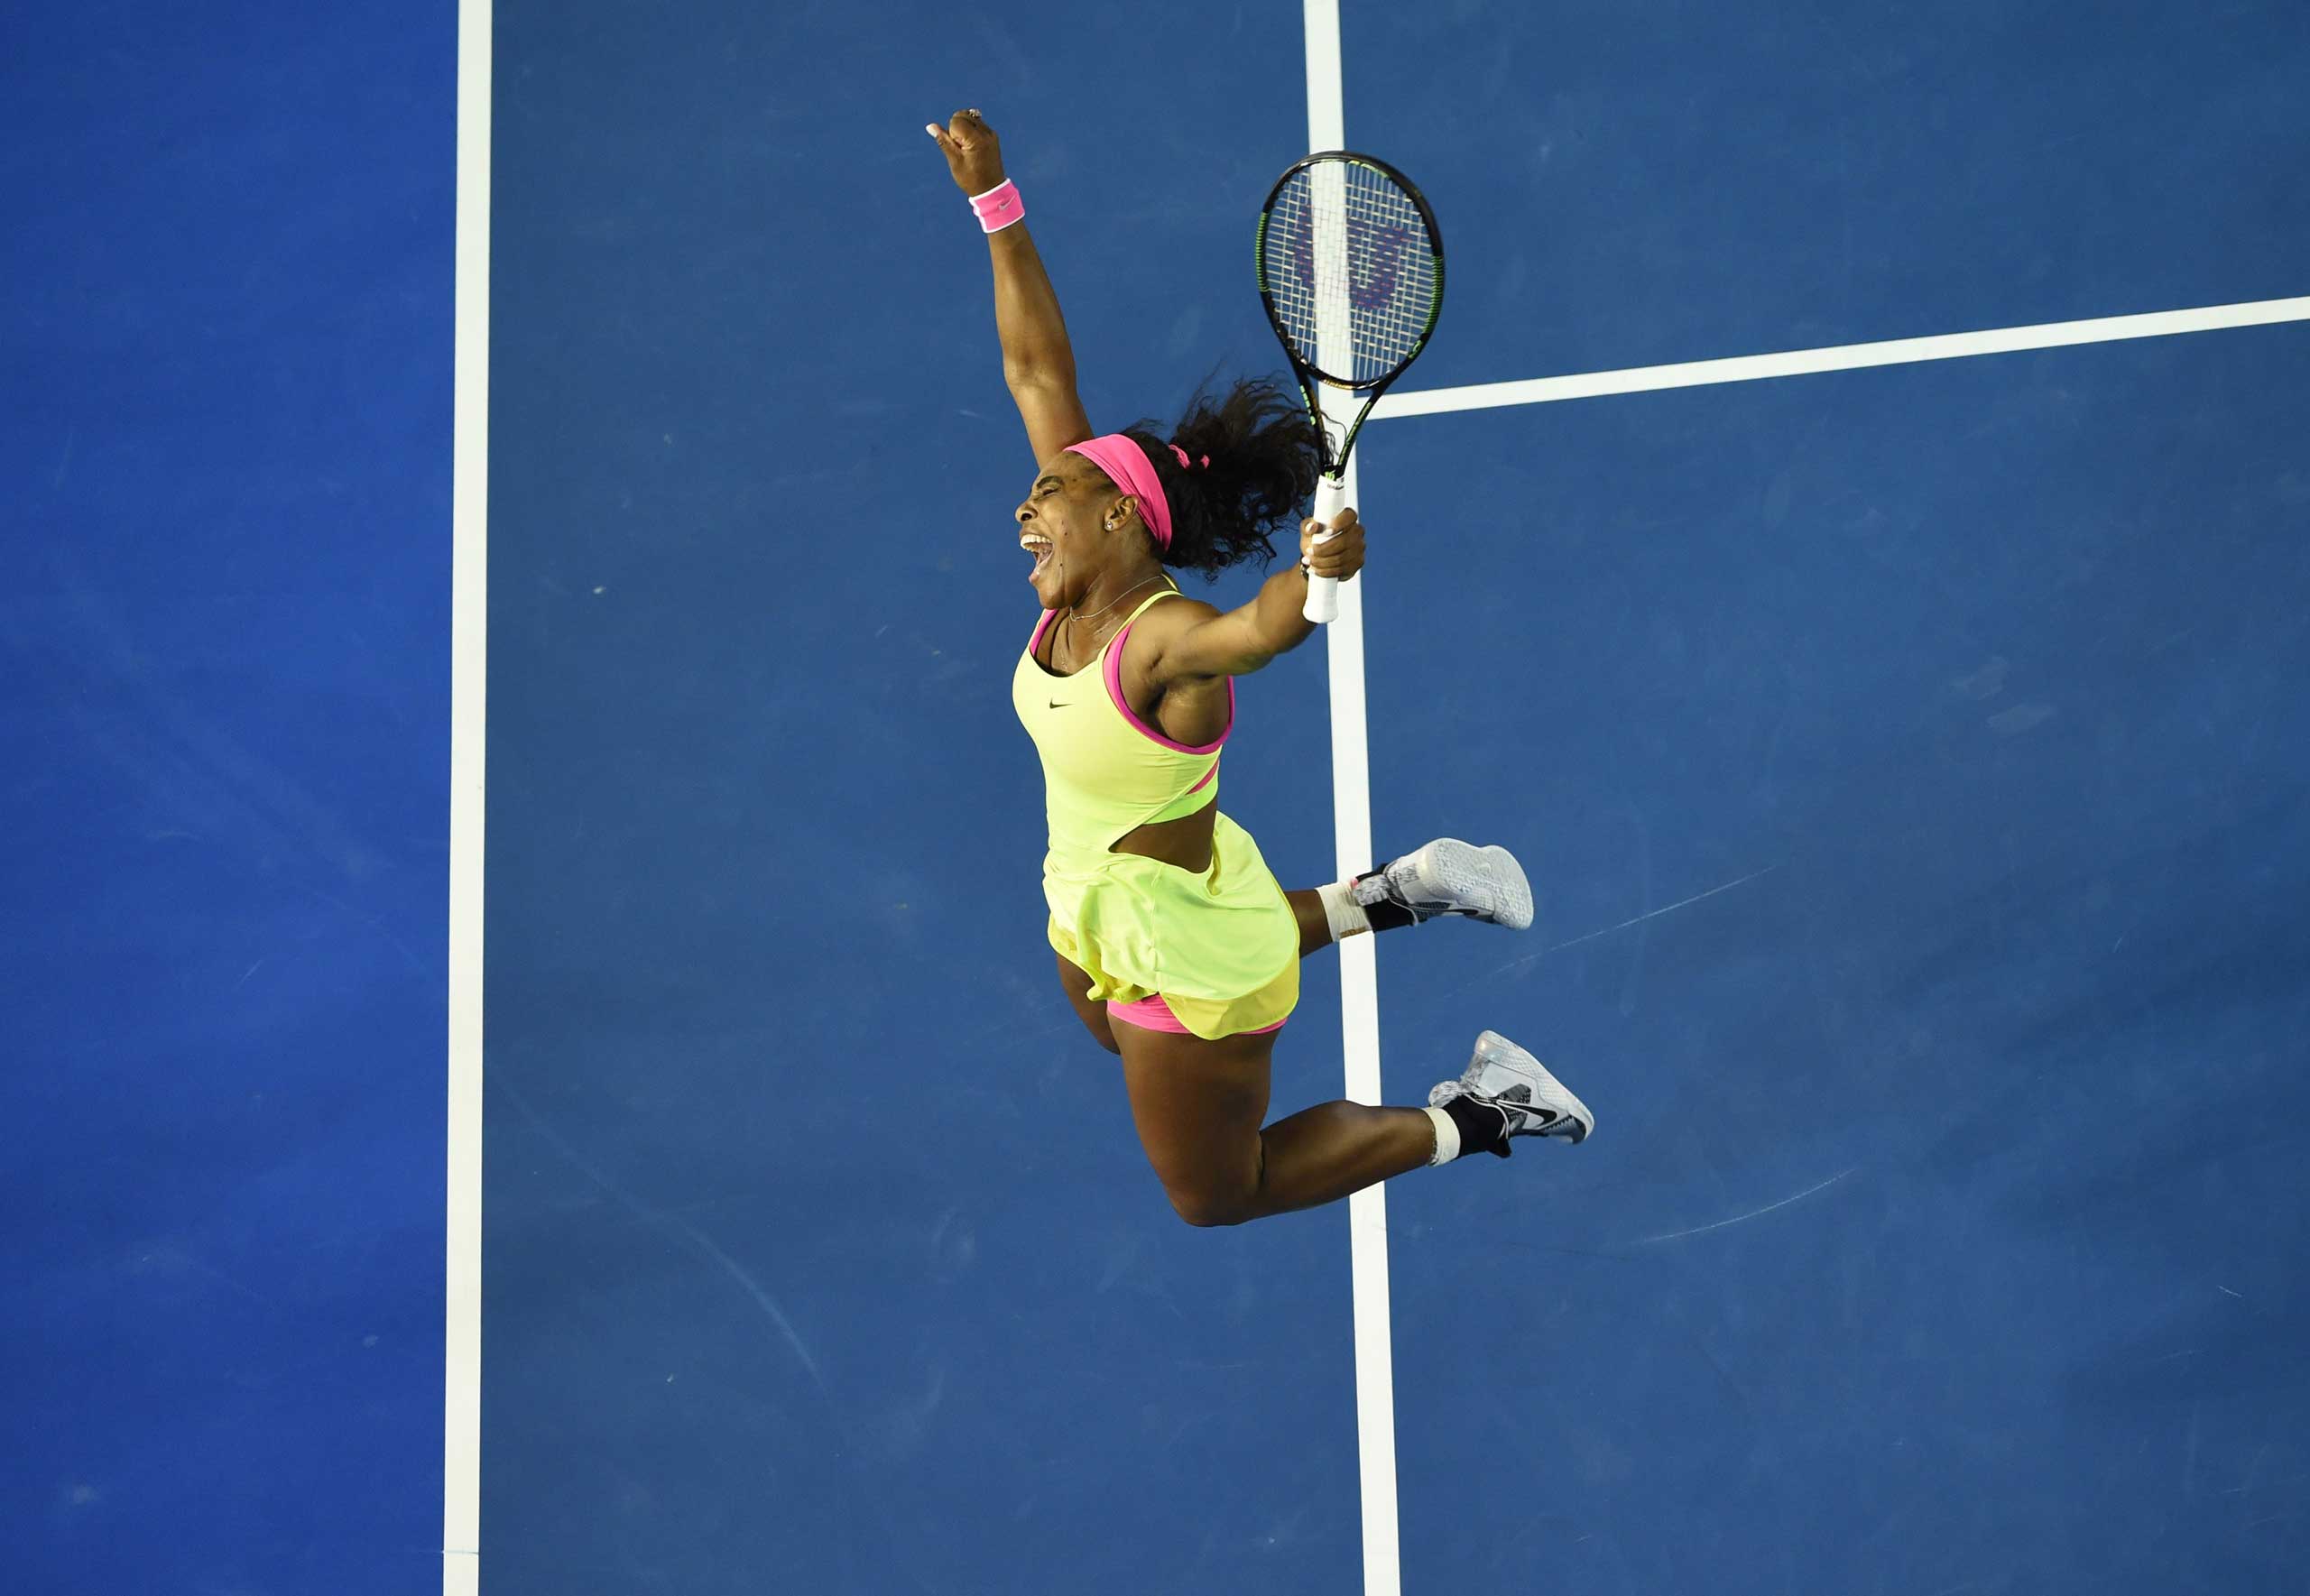 Serena Williams of the US celebrates after victory in her women's singles final match against Russia's Maria Sharapova on day thirteen of the 2015 Australian Open tennis tournament in Melbourne on Jan. 31, 2015. (William West—AFP/Getty Images)